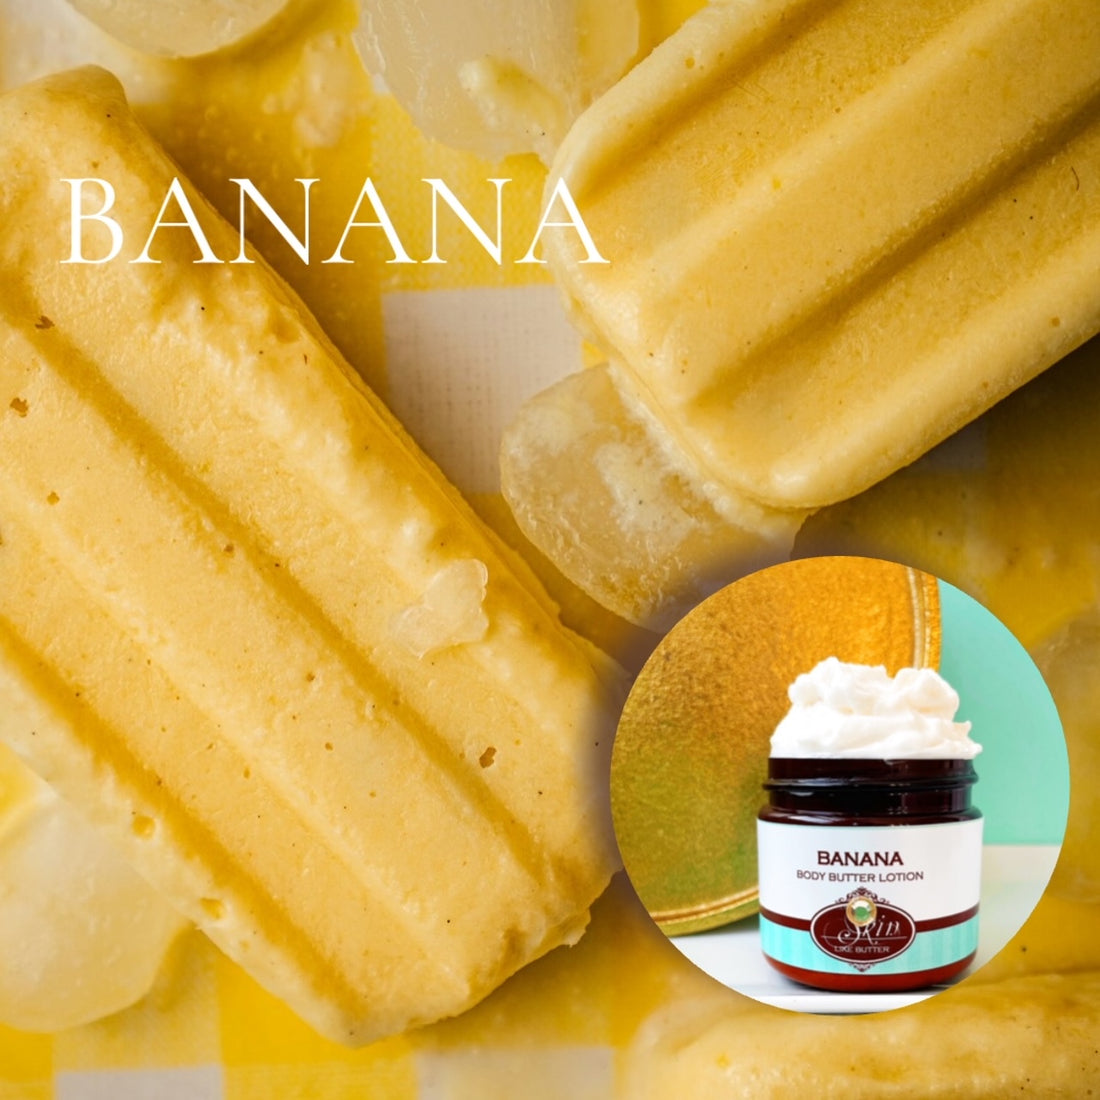 BANANA scented Body Butter, waterfree and non-greasy, vegan